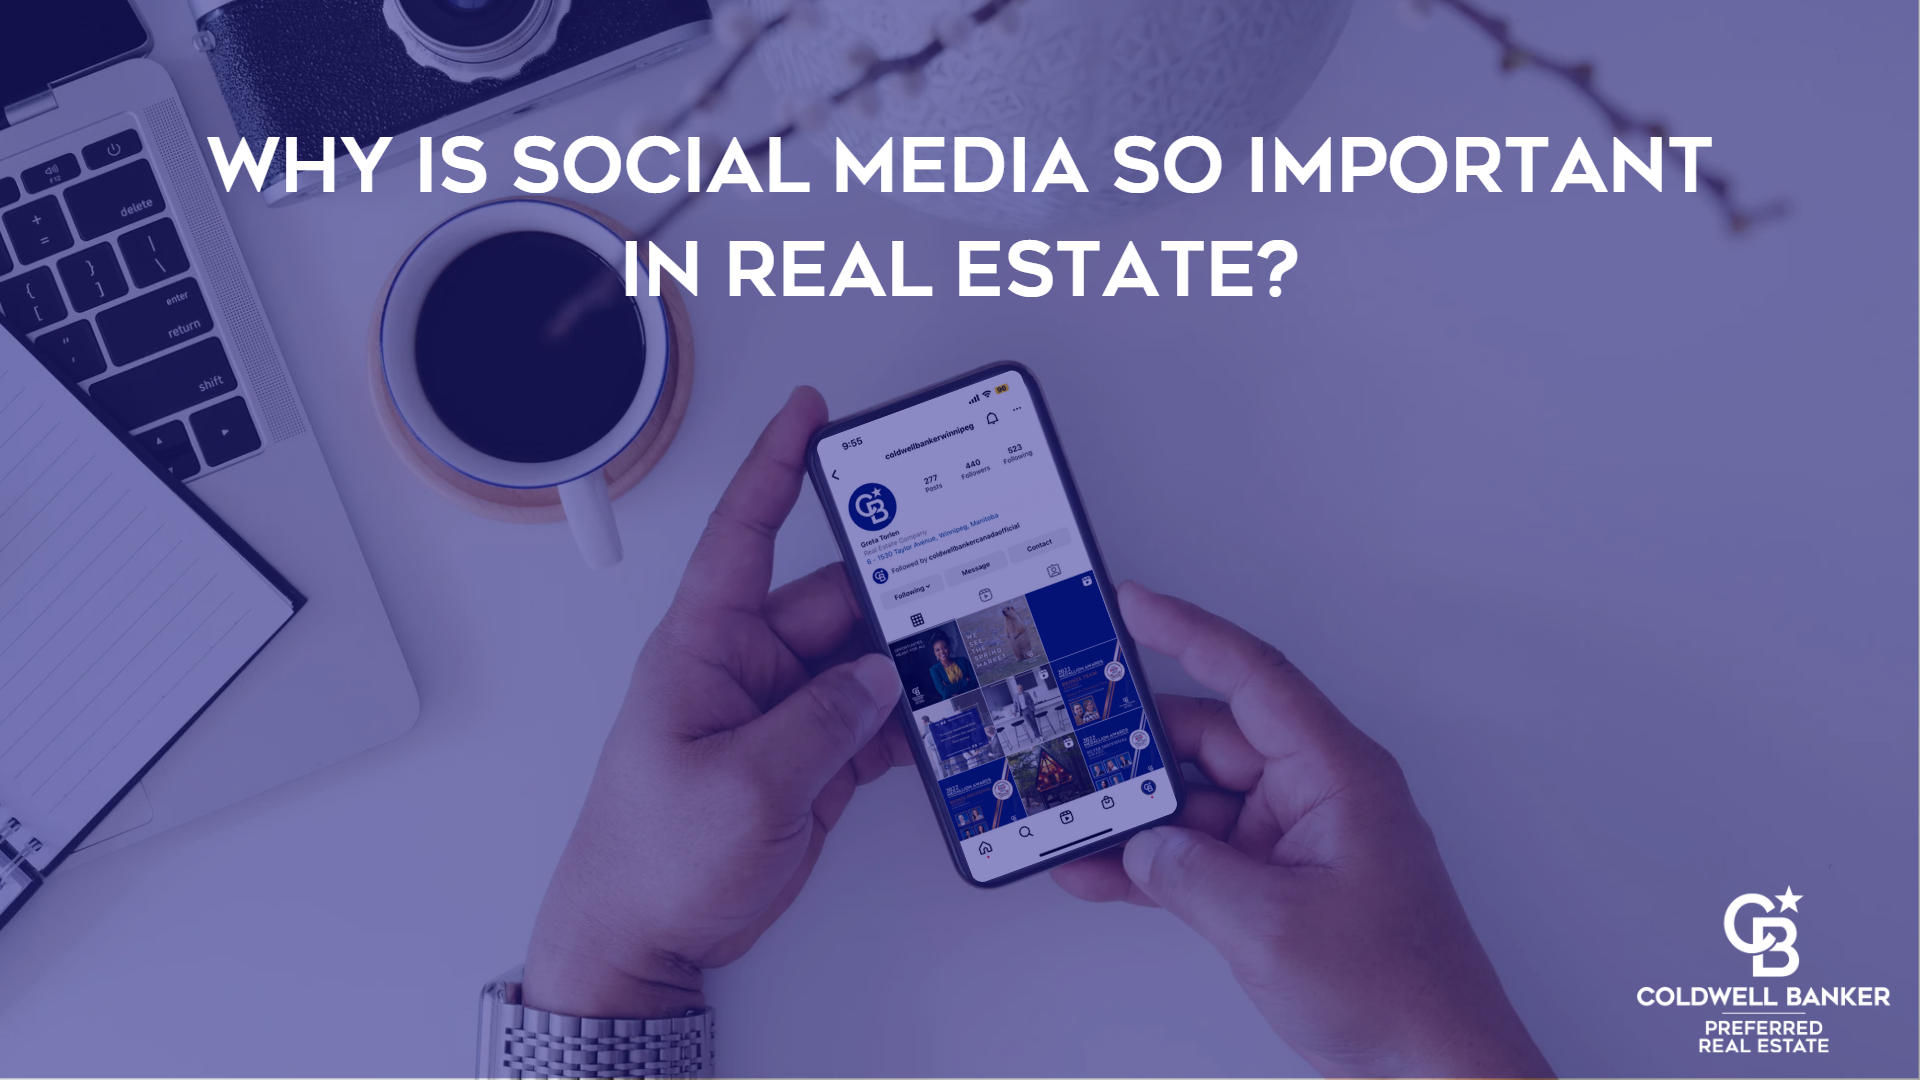 WHY IS SOCIAL MEDIA SO IMPORTANT IN REAL ESTATE banner